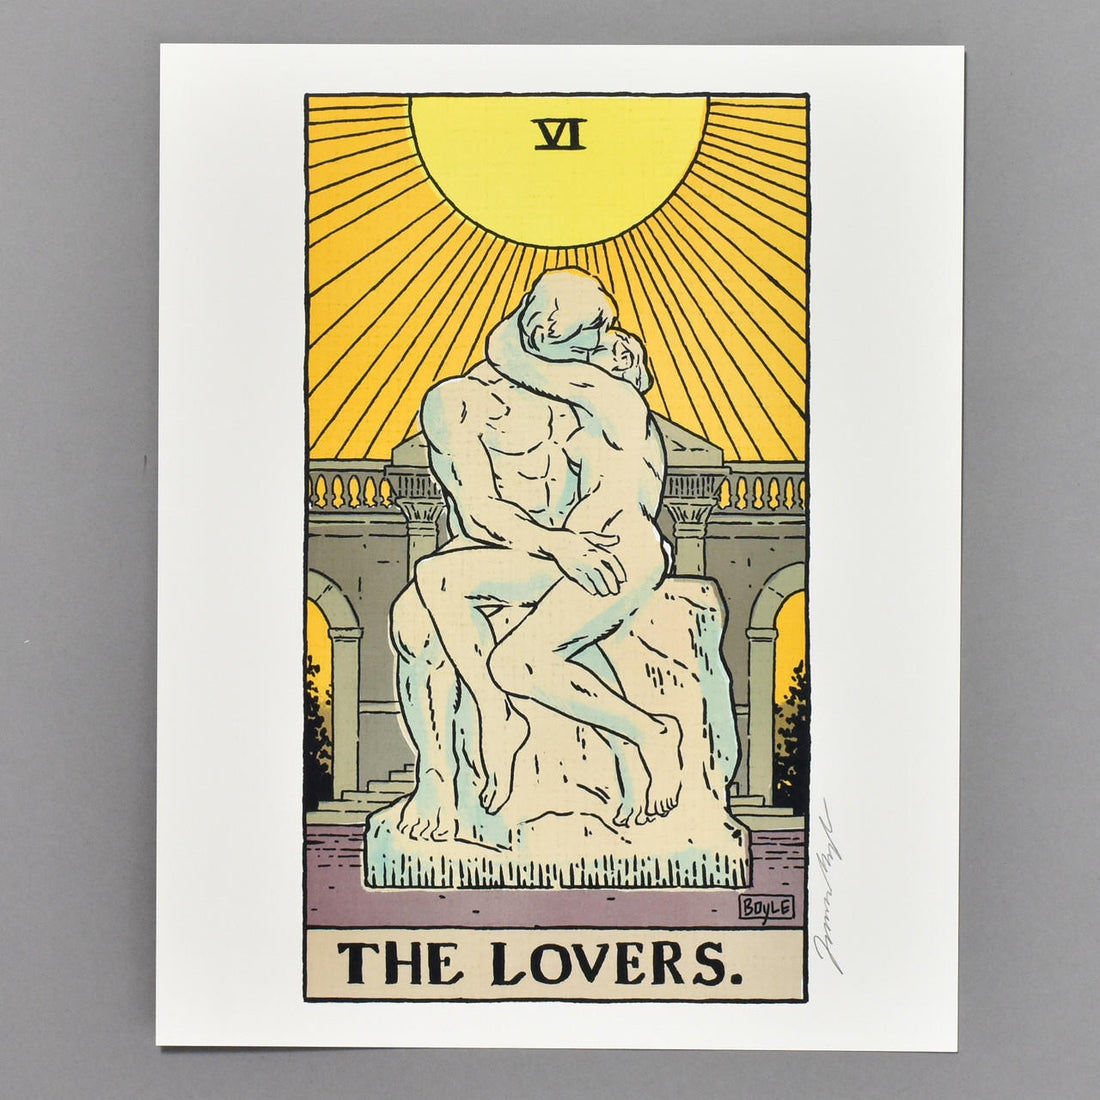 Unconventional Love: Exploring Alternative Relationship Styles with Tarot